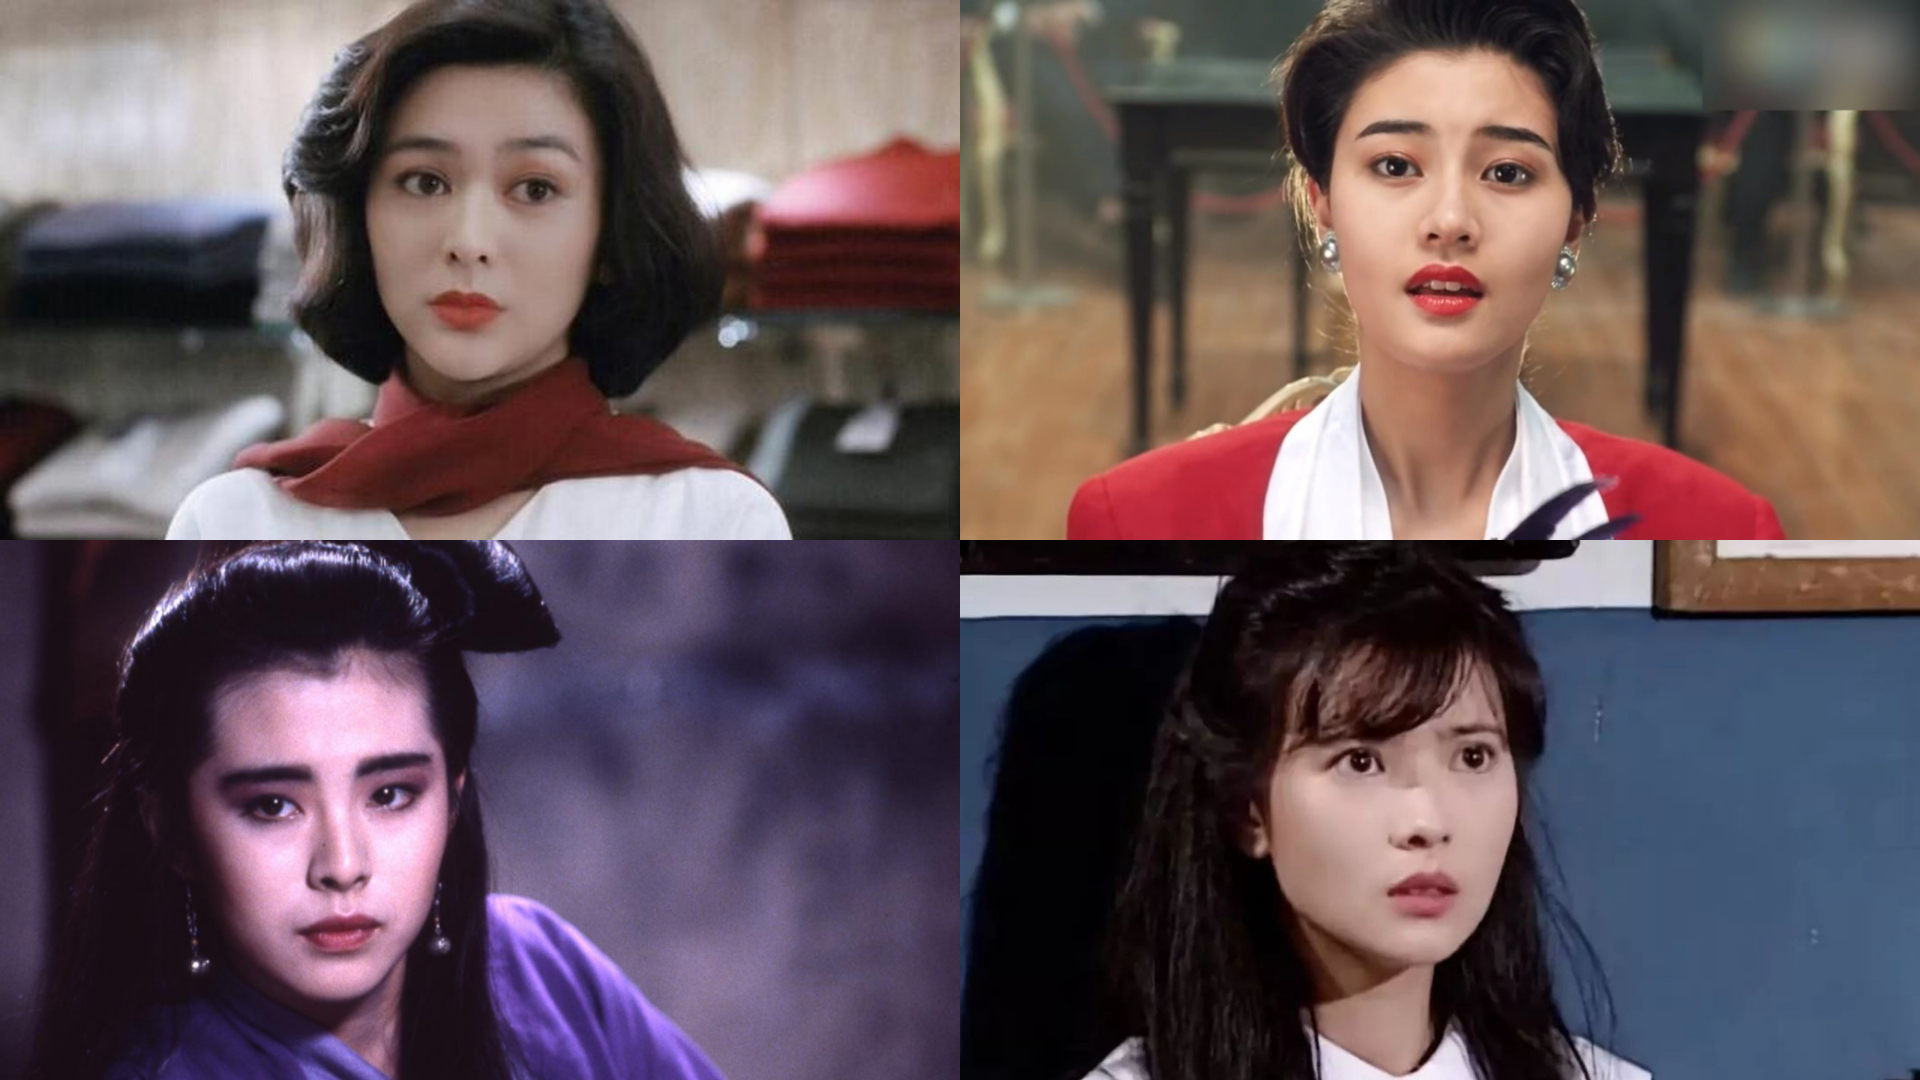 Here Are The Top 15 “Hongkong Screen Goddesses” Of The ‘80s & ‘90s ...